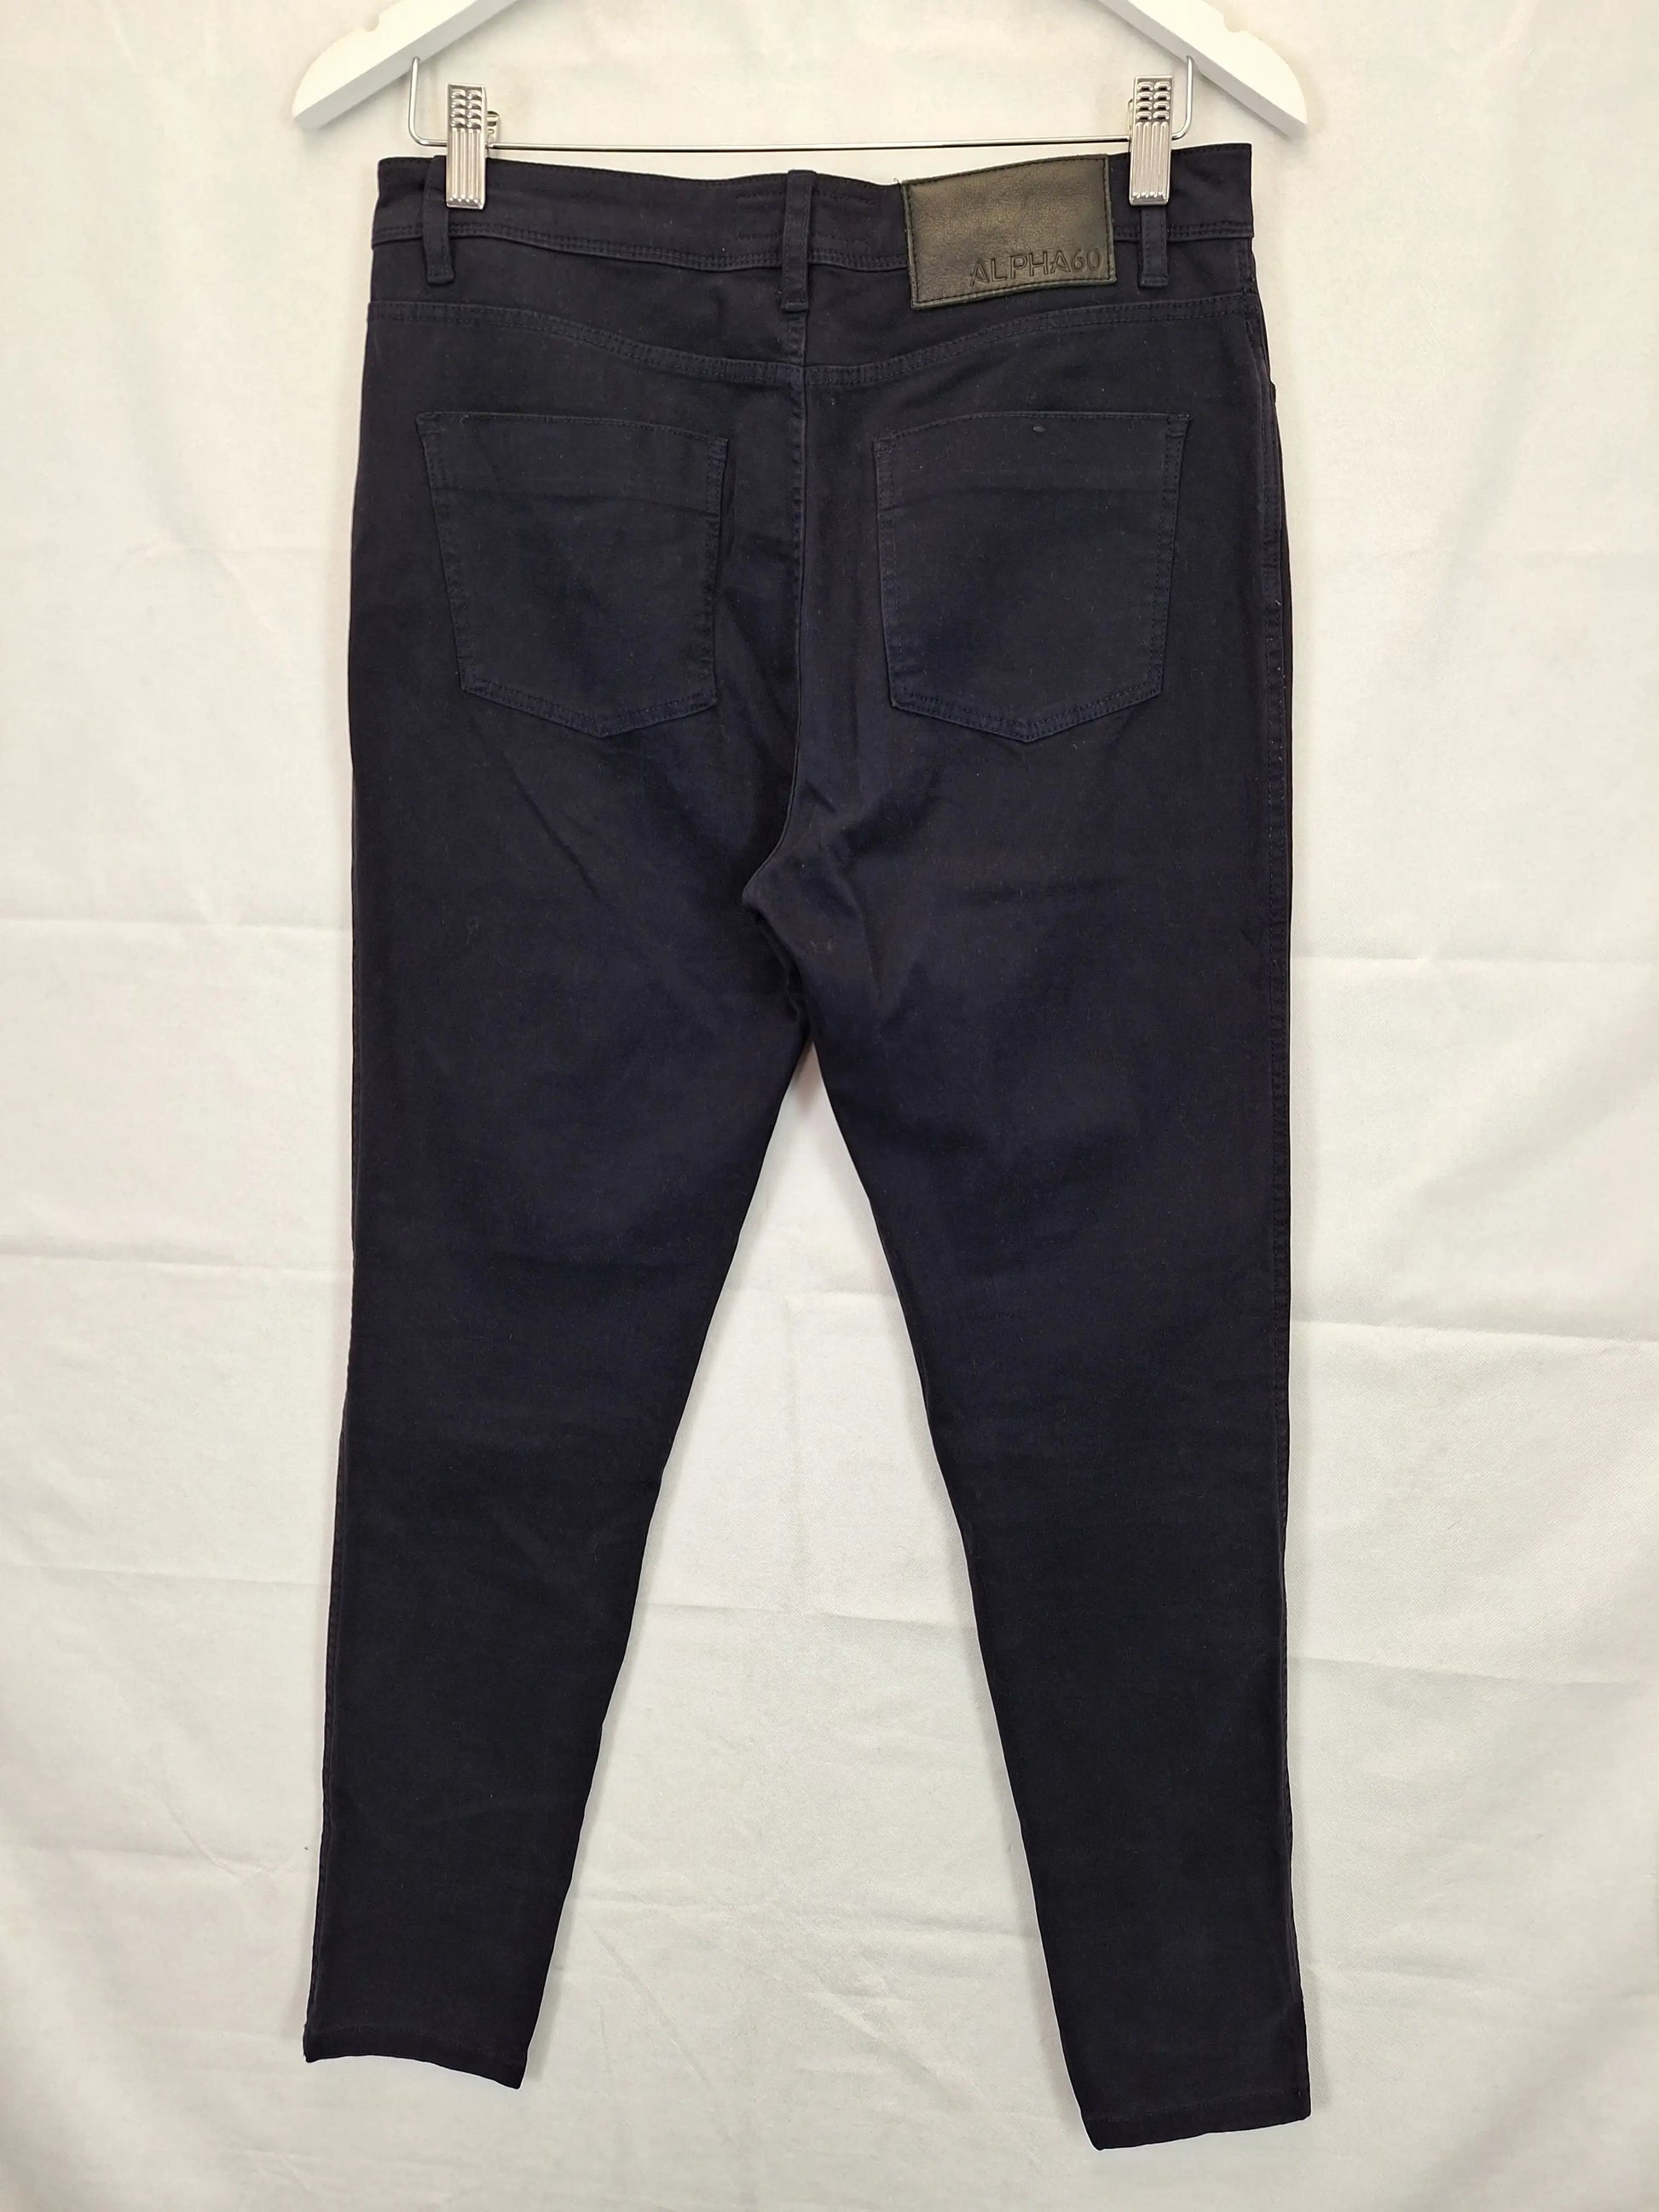 Review Basic Navy Work Pants Size 12